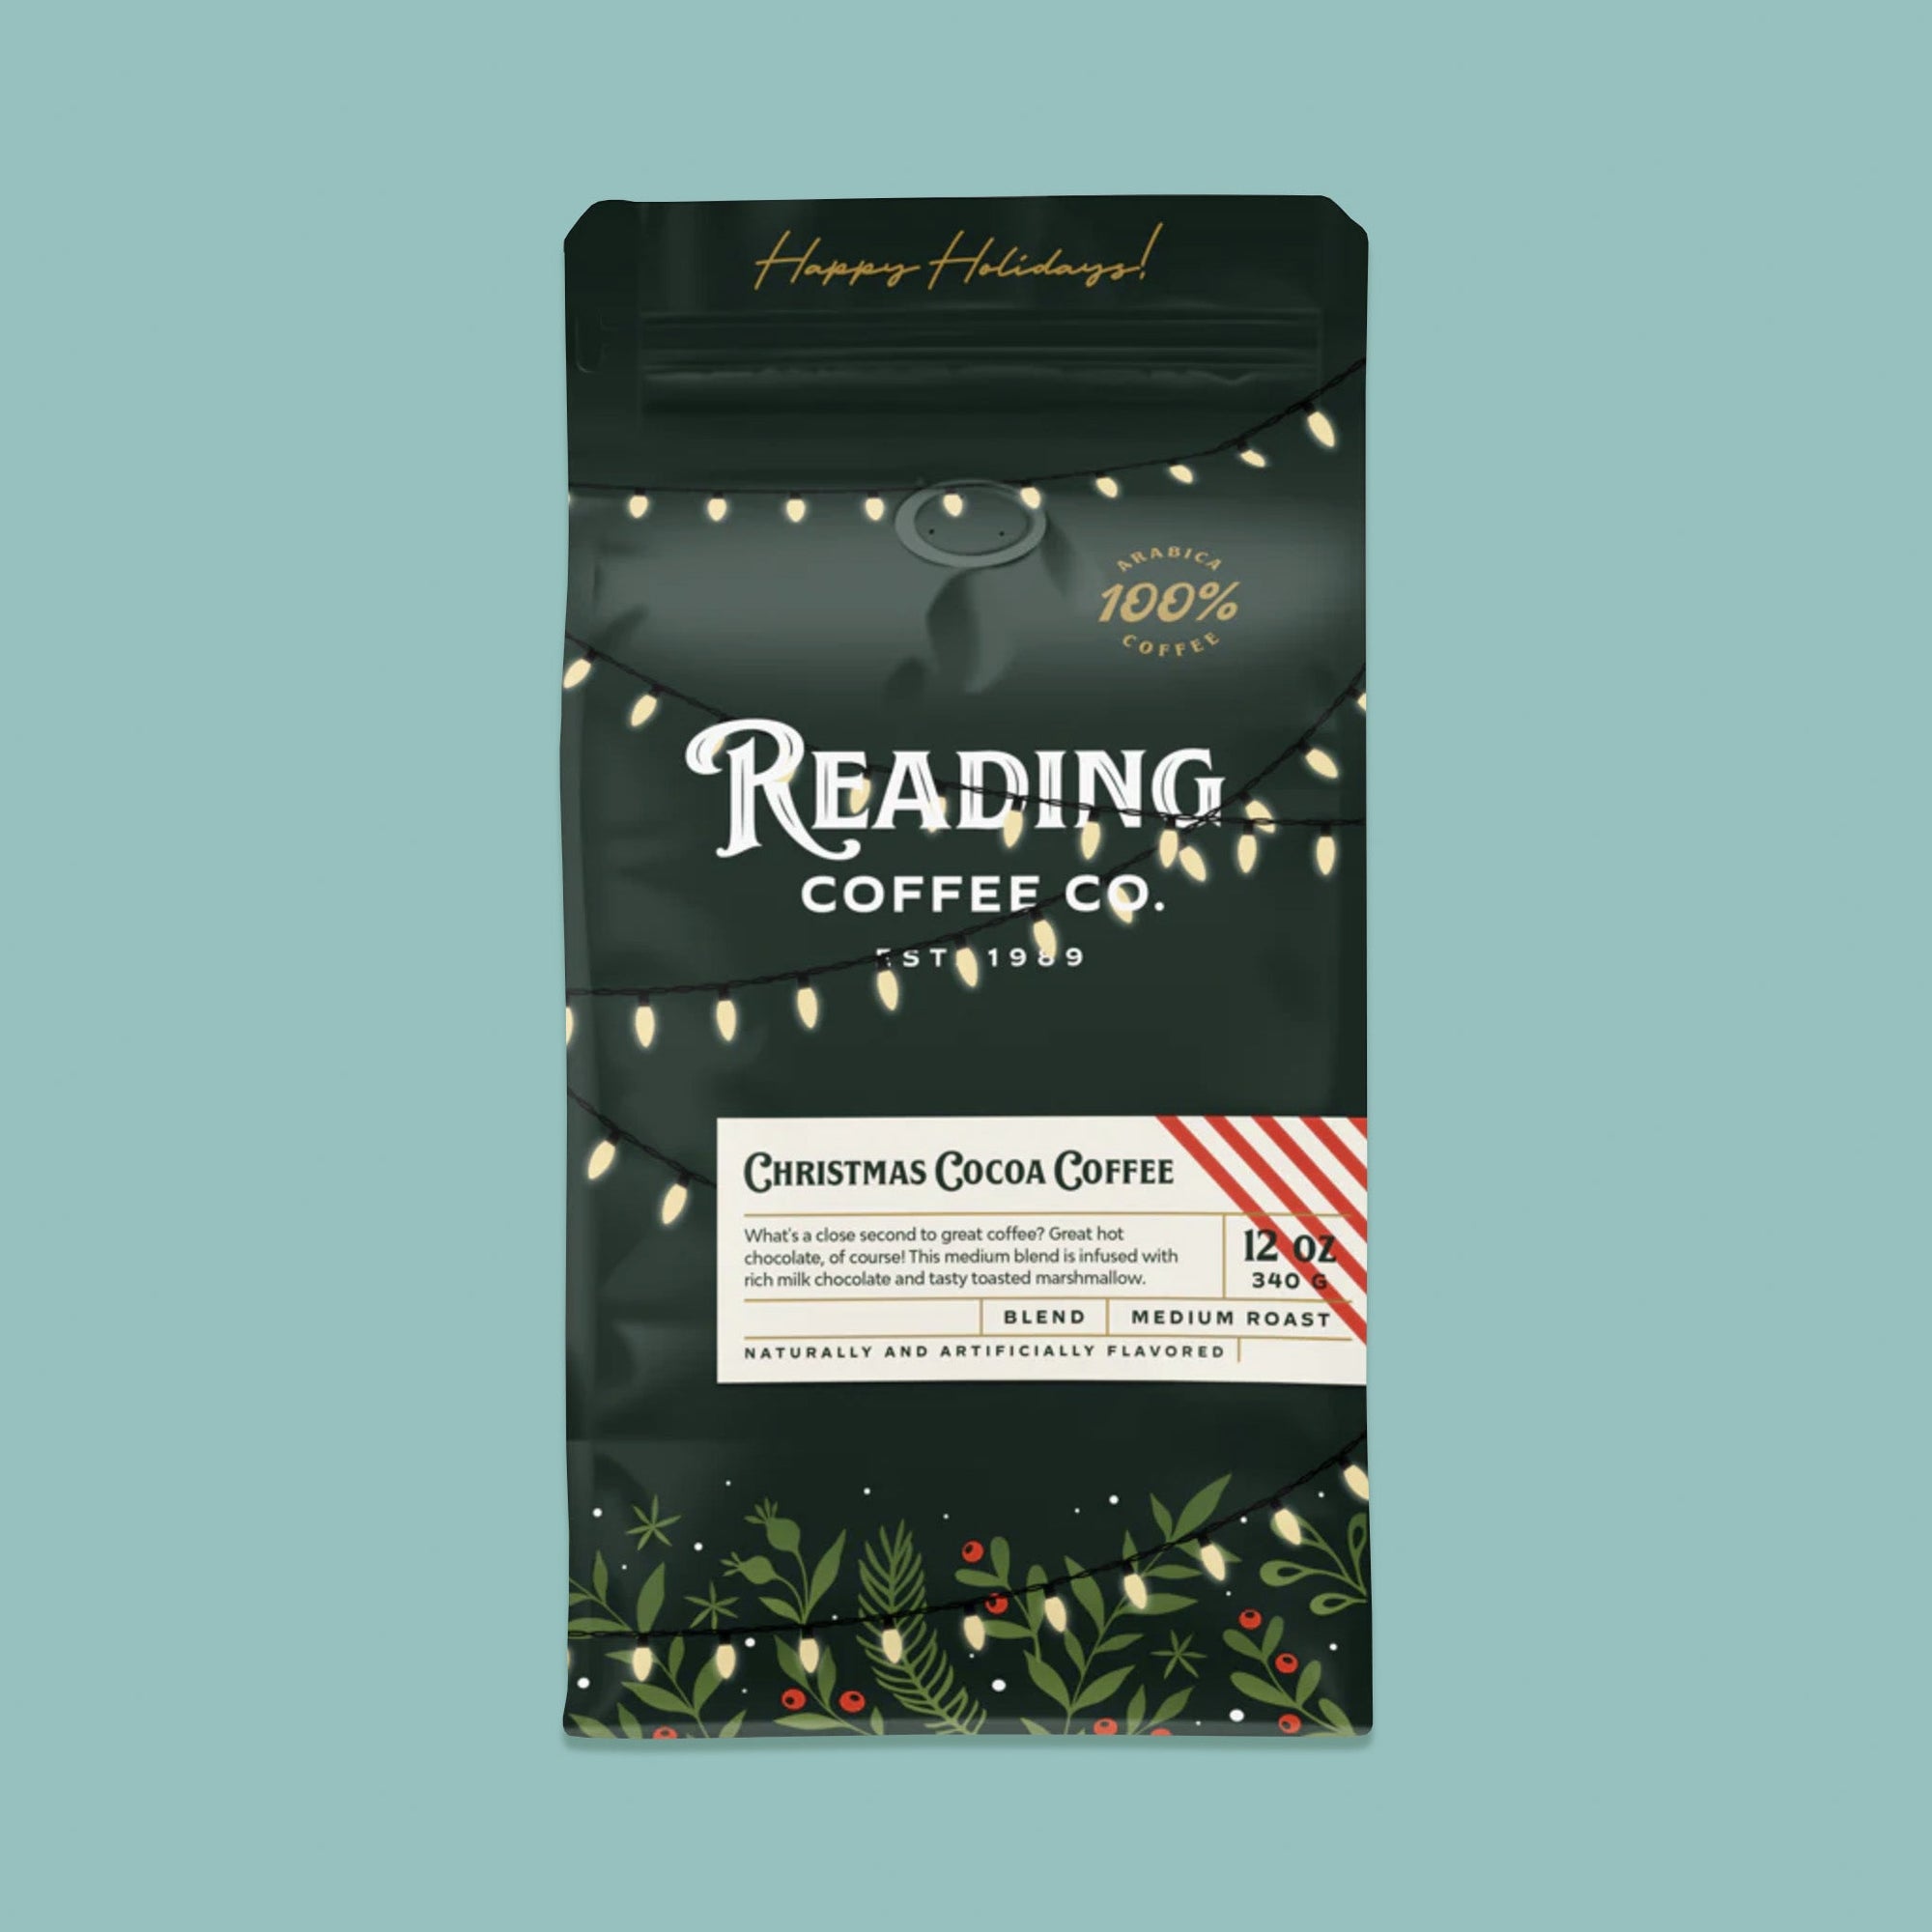 On a sage green background sits a dark green package of coffee. This package is gold, white, and dark green lettering. There are swags of lights and greenery with berries. It says "Happy Holidays!", "Reading Coffee Co. Est. 1989", "Christmas Cocoa Coffee Blend Medium Roast." It is '100% Arabica Coffee. It also says "What's a close second to great coffee? Great hot chocolate, of course! This medium blend is infused with rich milk chocolate and tasty toasted marshmallow." 12 oz 340g